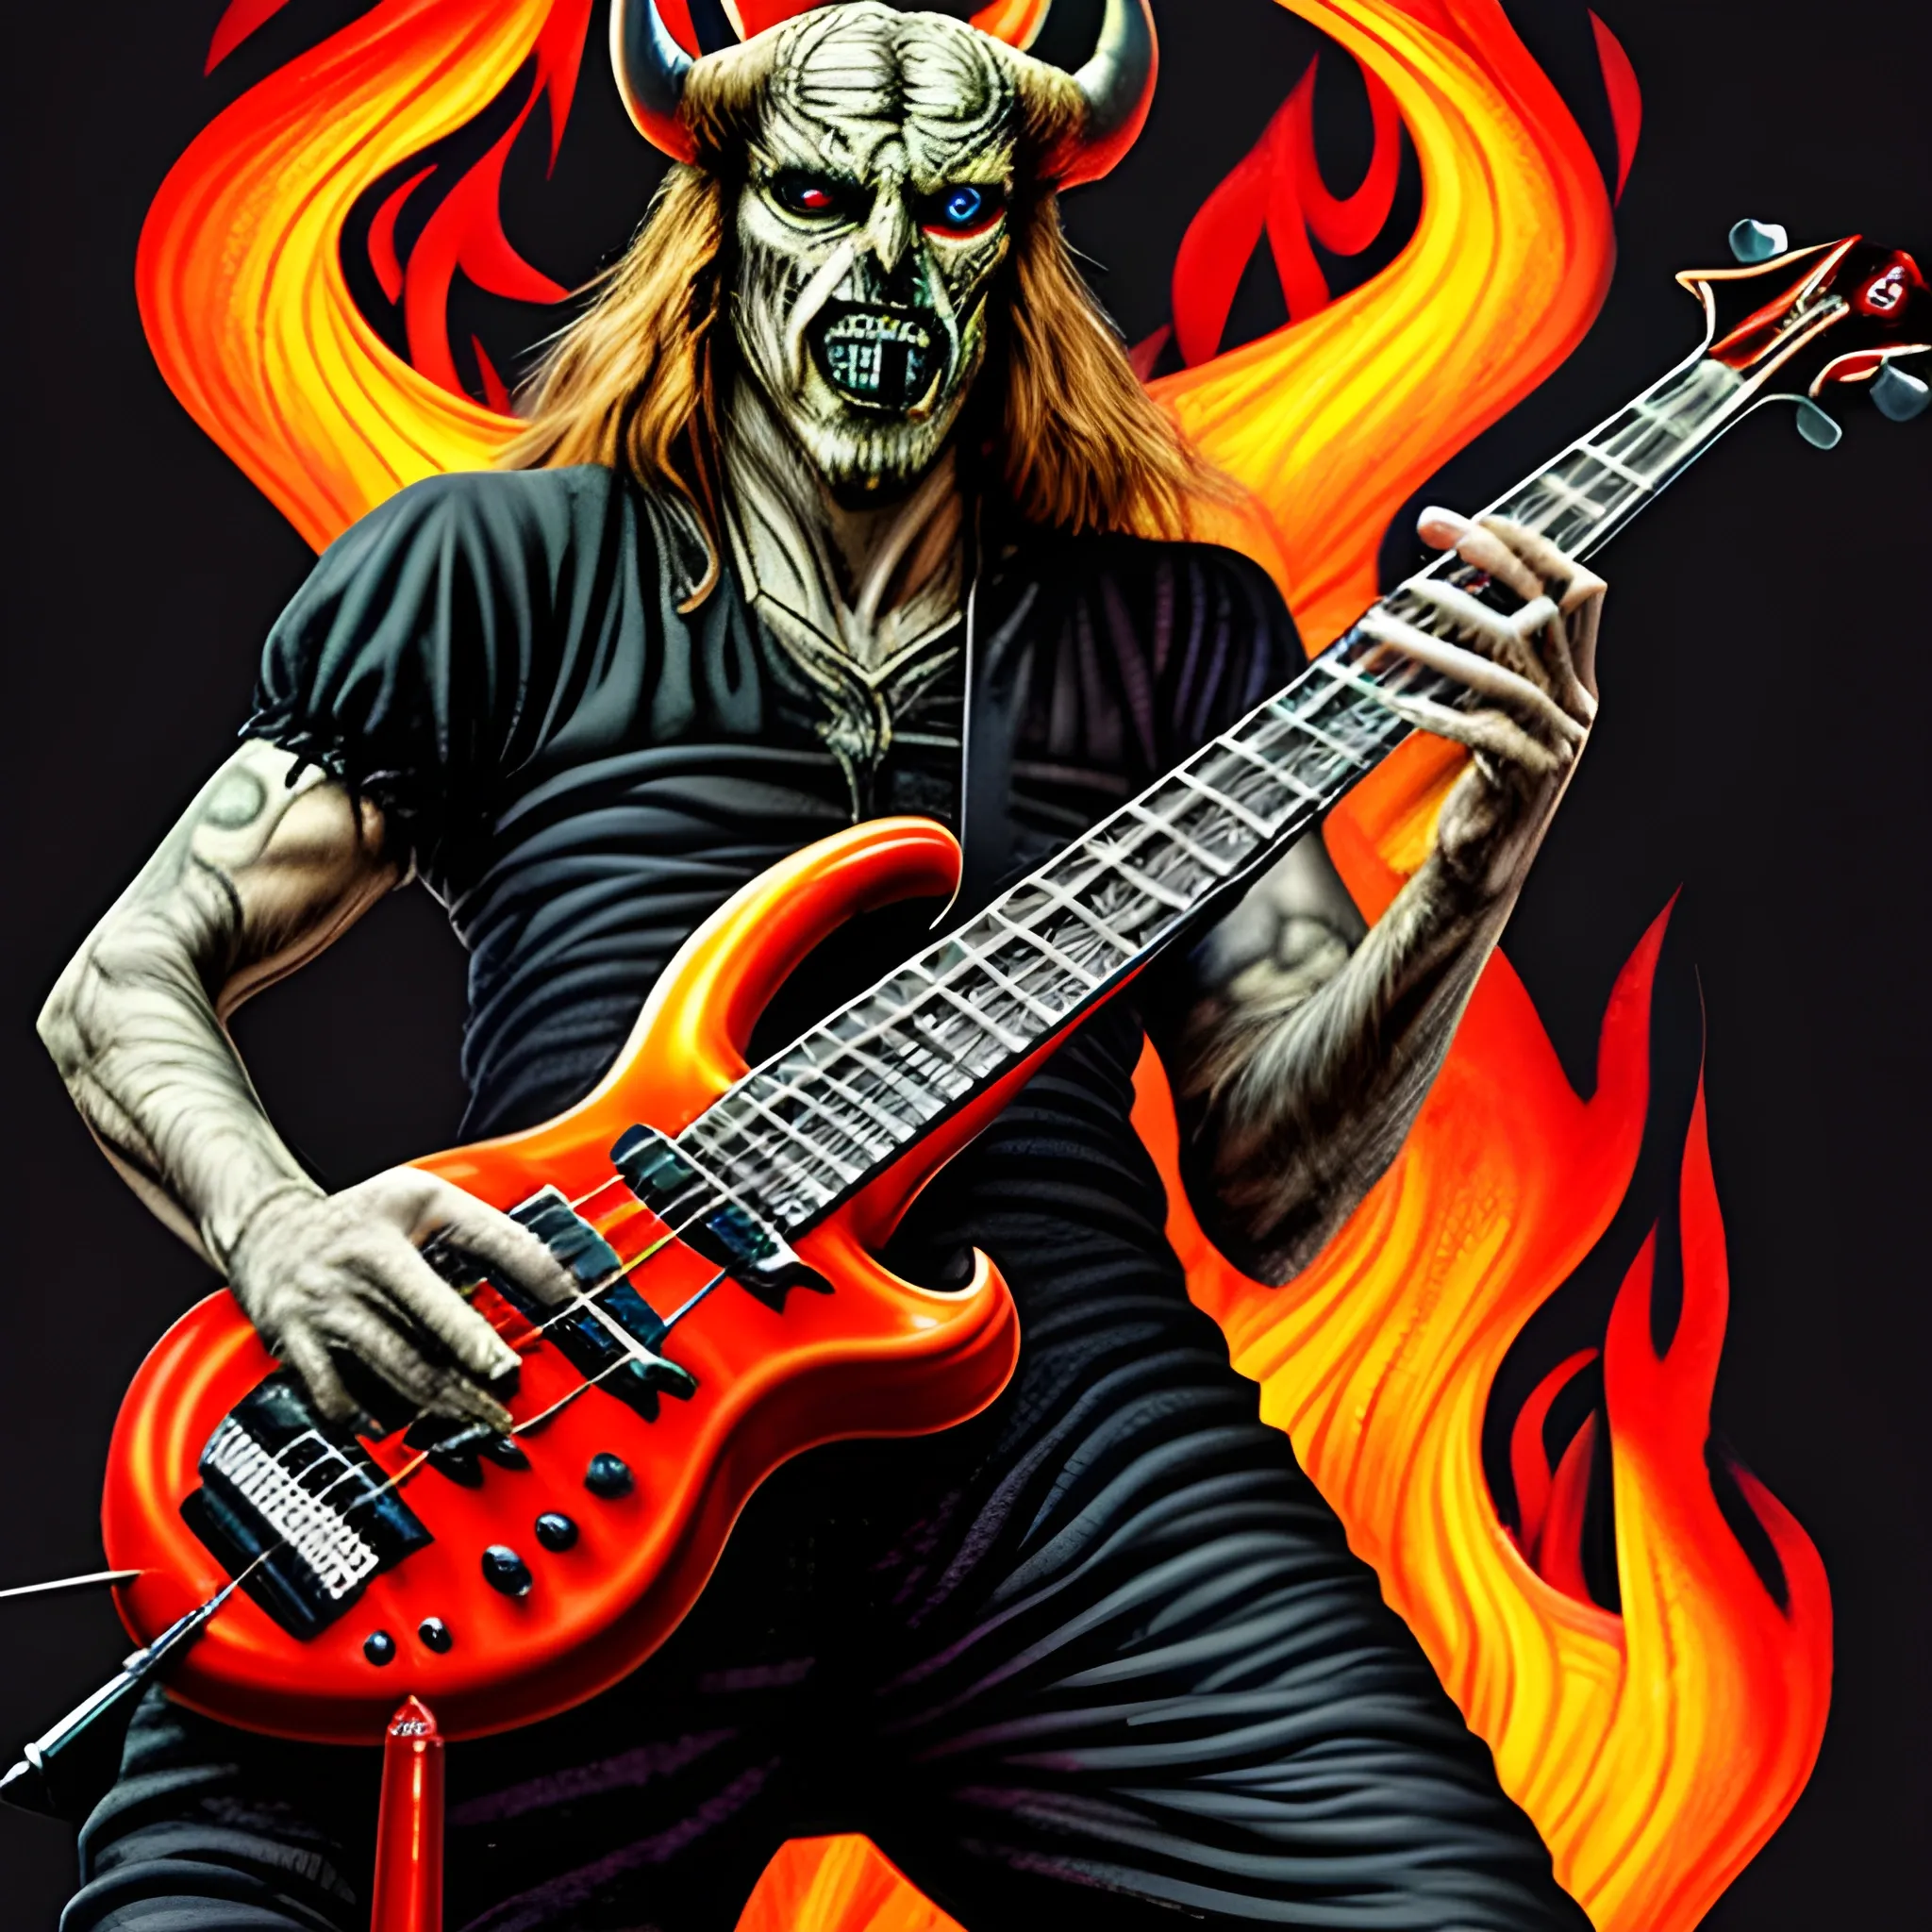 Look1, Trippy create an image from this realistic full length image of a devil playing a five-string electric bass on a stage with fire